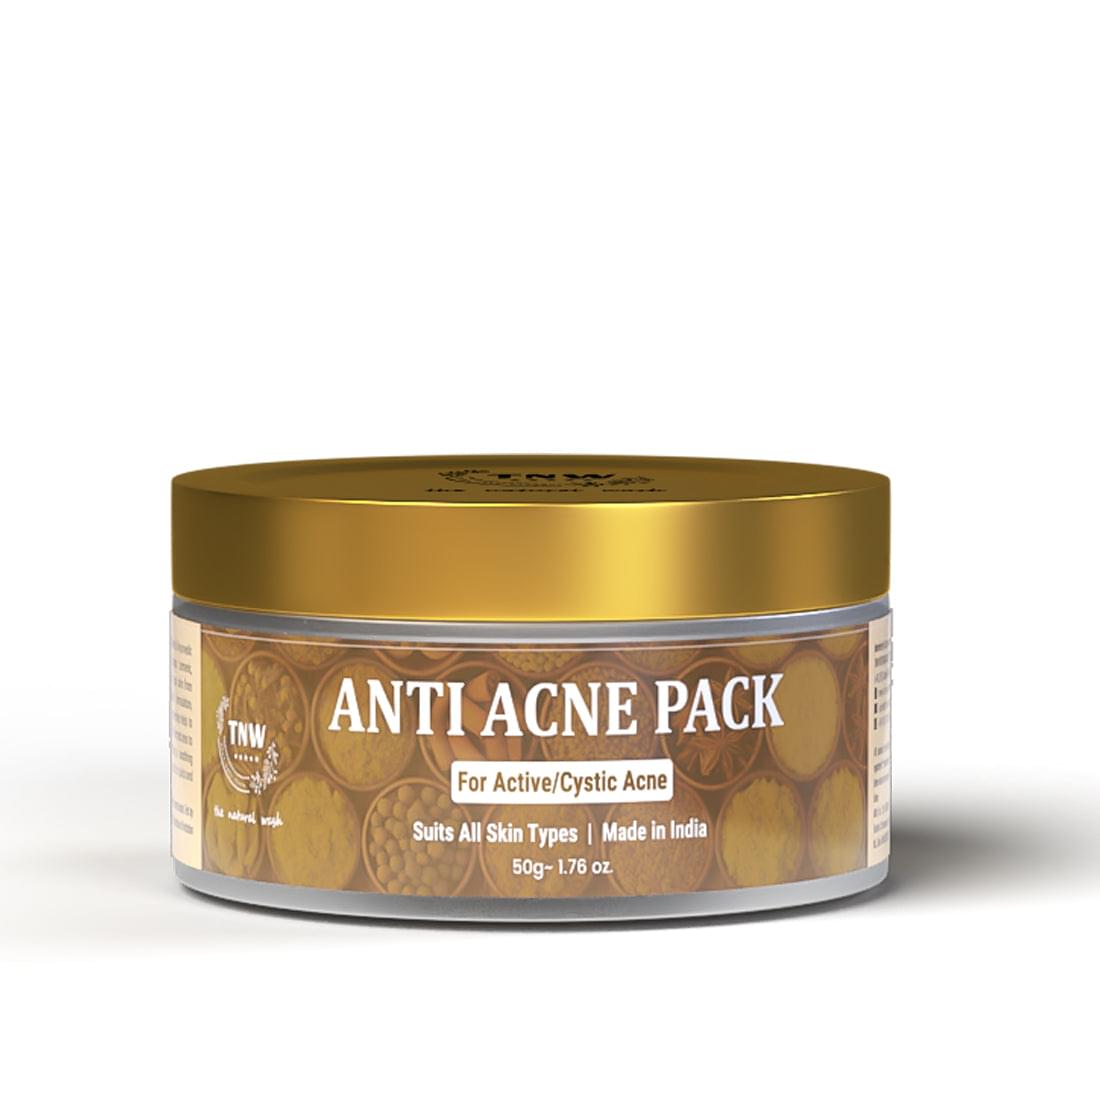 Anti Acne Pack for Reducing Acne and Blemishes  (Ready-To-Use)